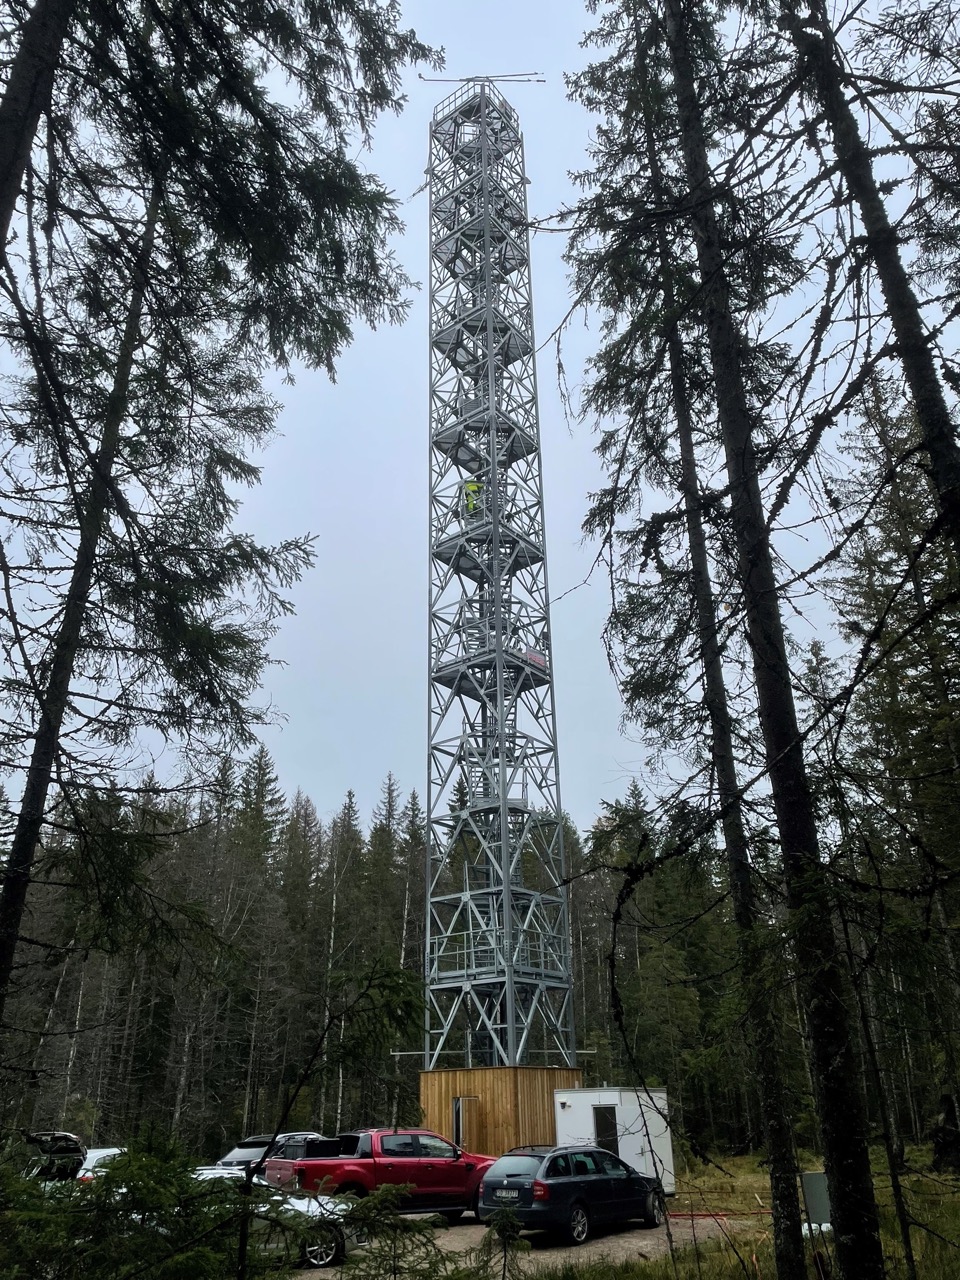 the eddy covariance tower at the Hurdal station